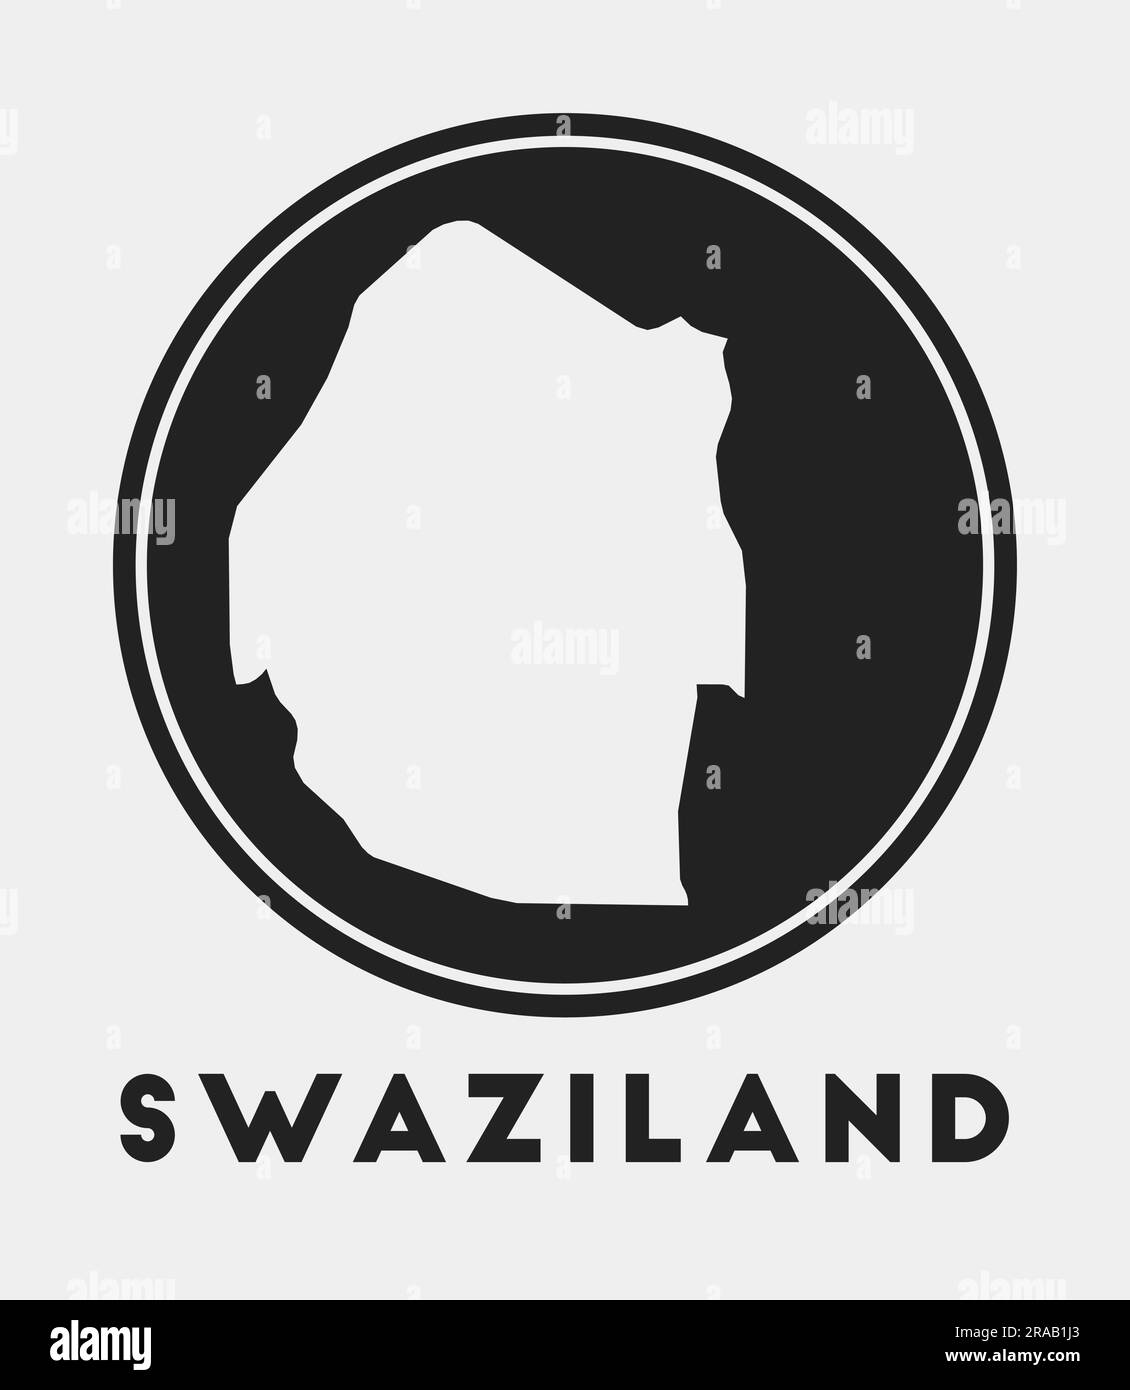 Swaziland icon. Round logo with country map and title. Stylish Swaziland badge with map. Vector illustration. Stock Vector